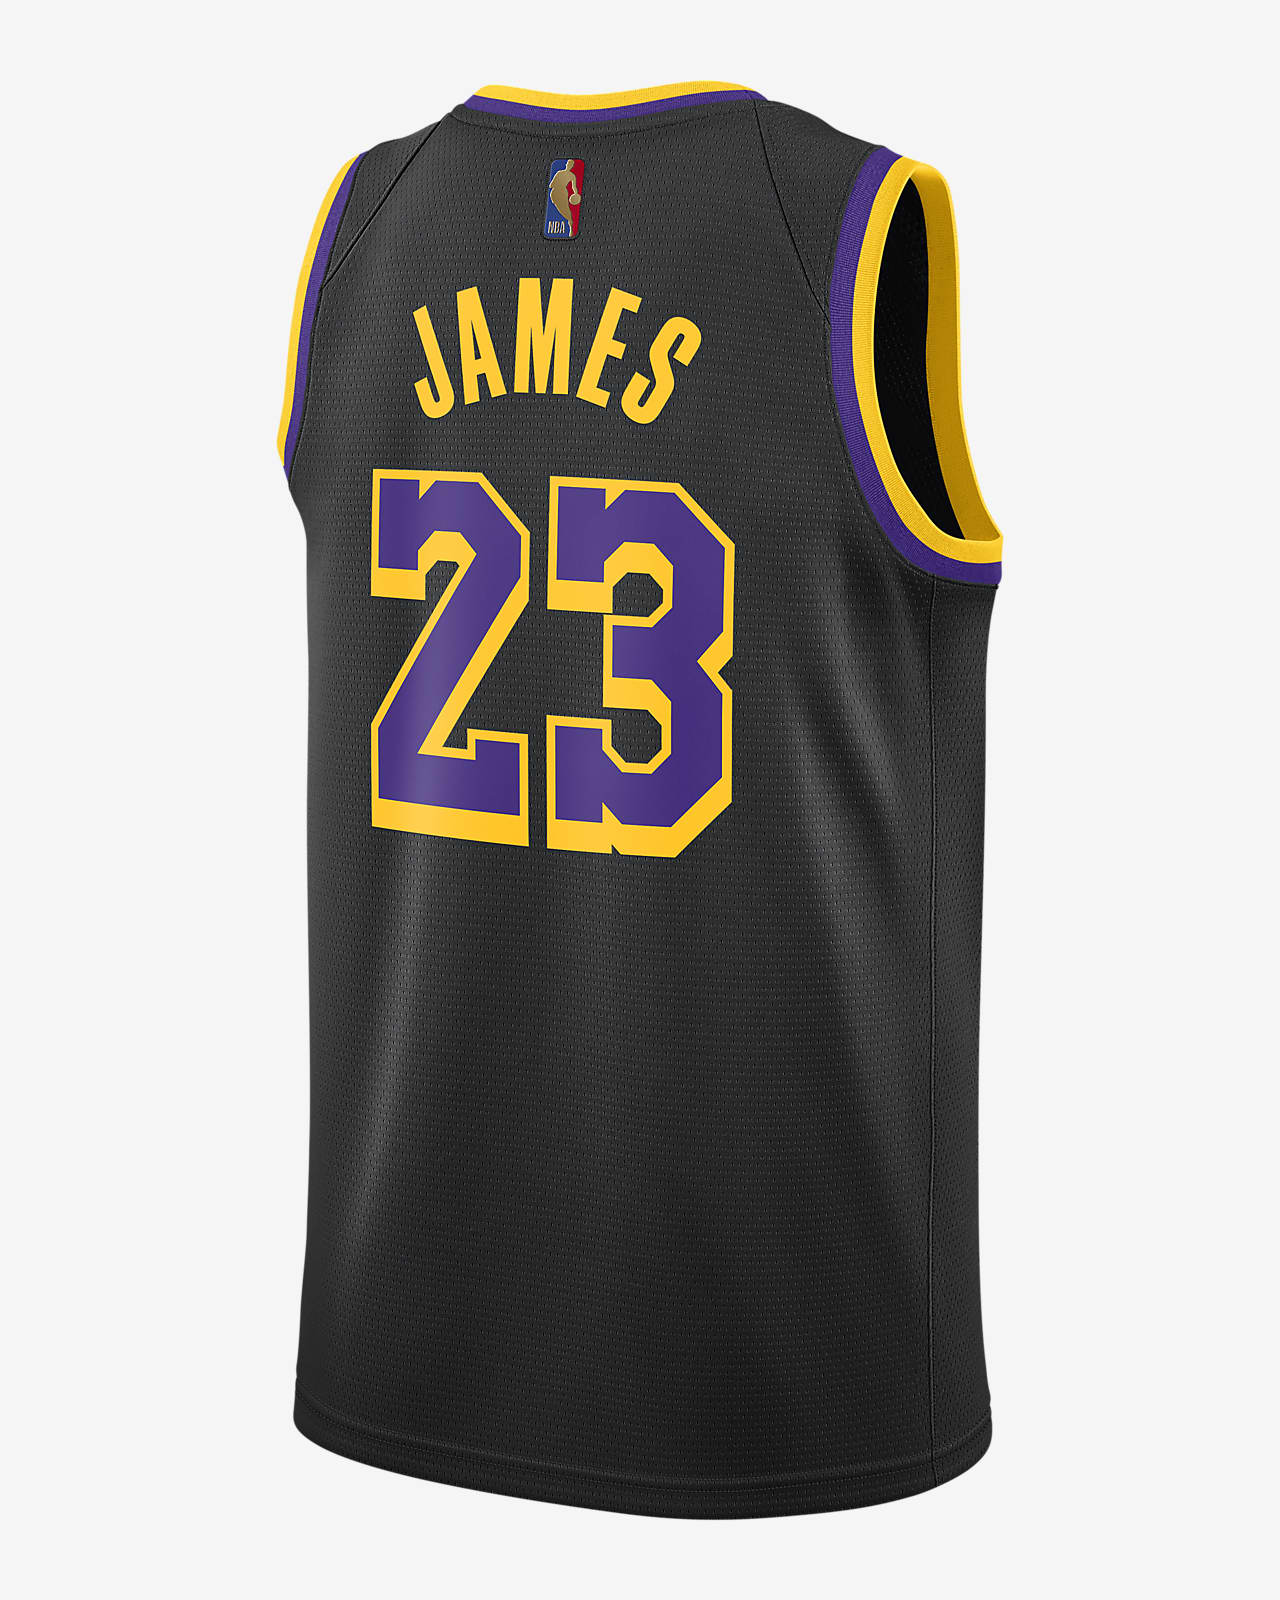 lebron james jersey for sale